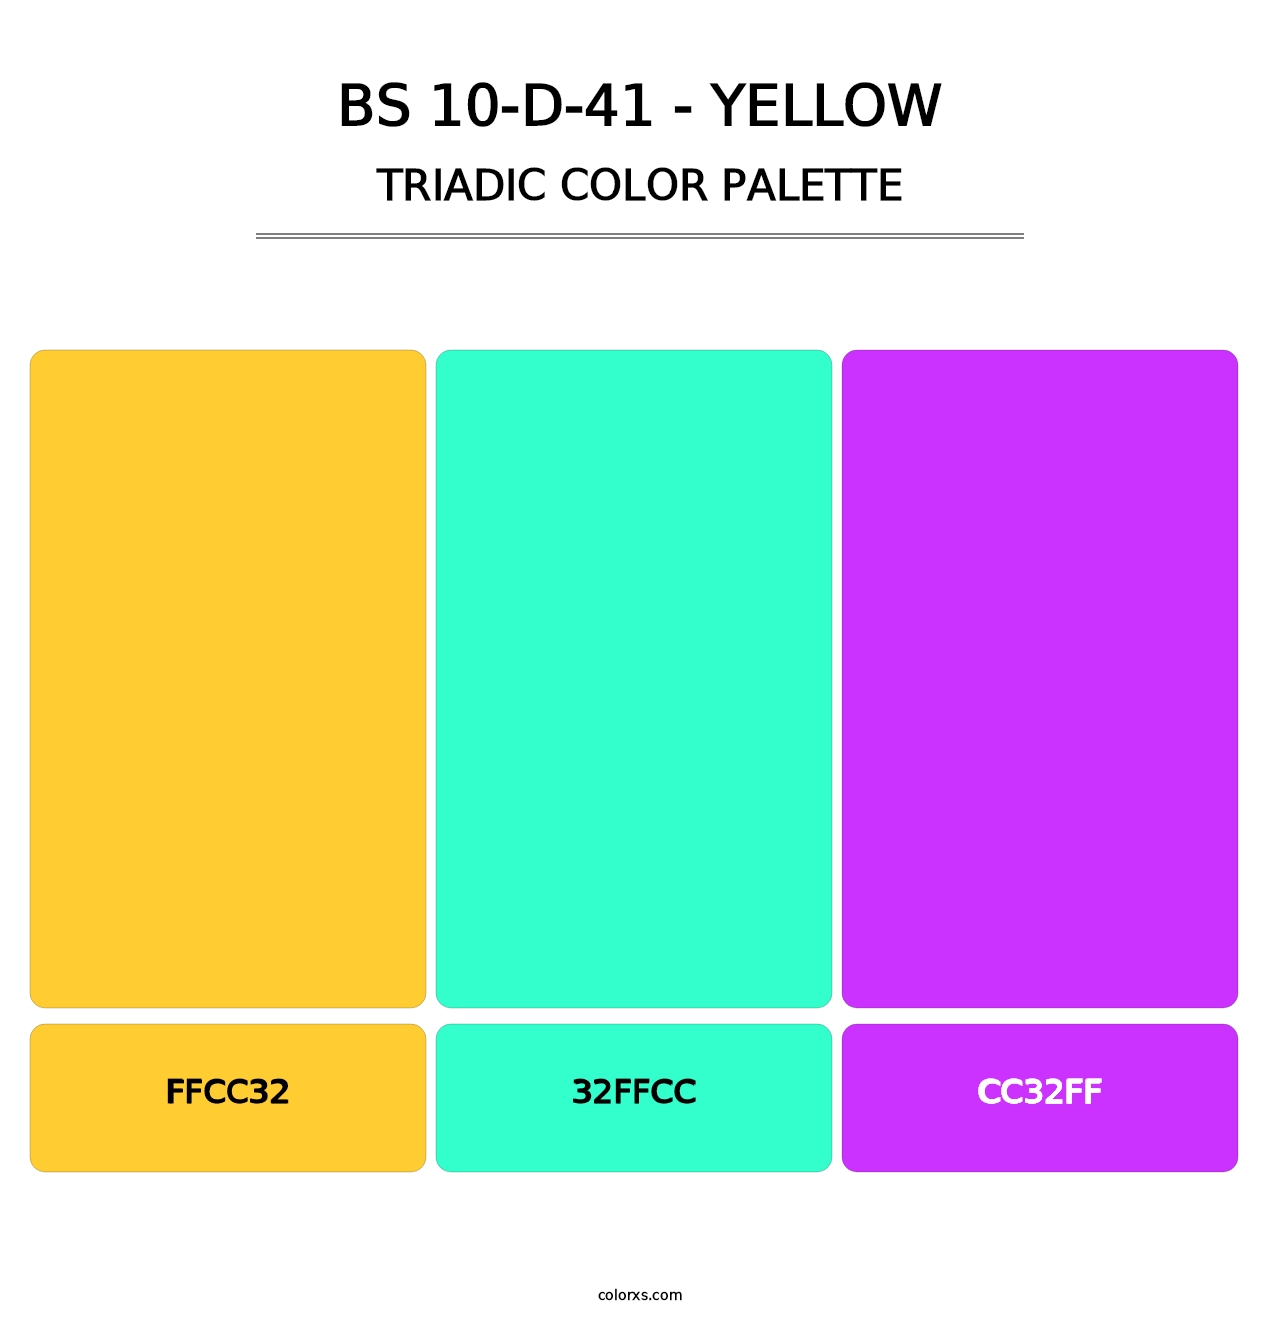 BS 10-D-41 - Yellow - Triadic Color Palette